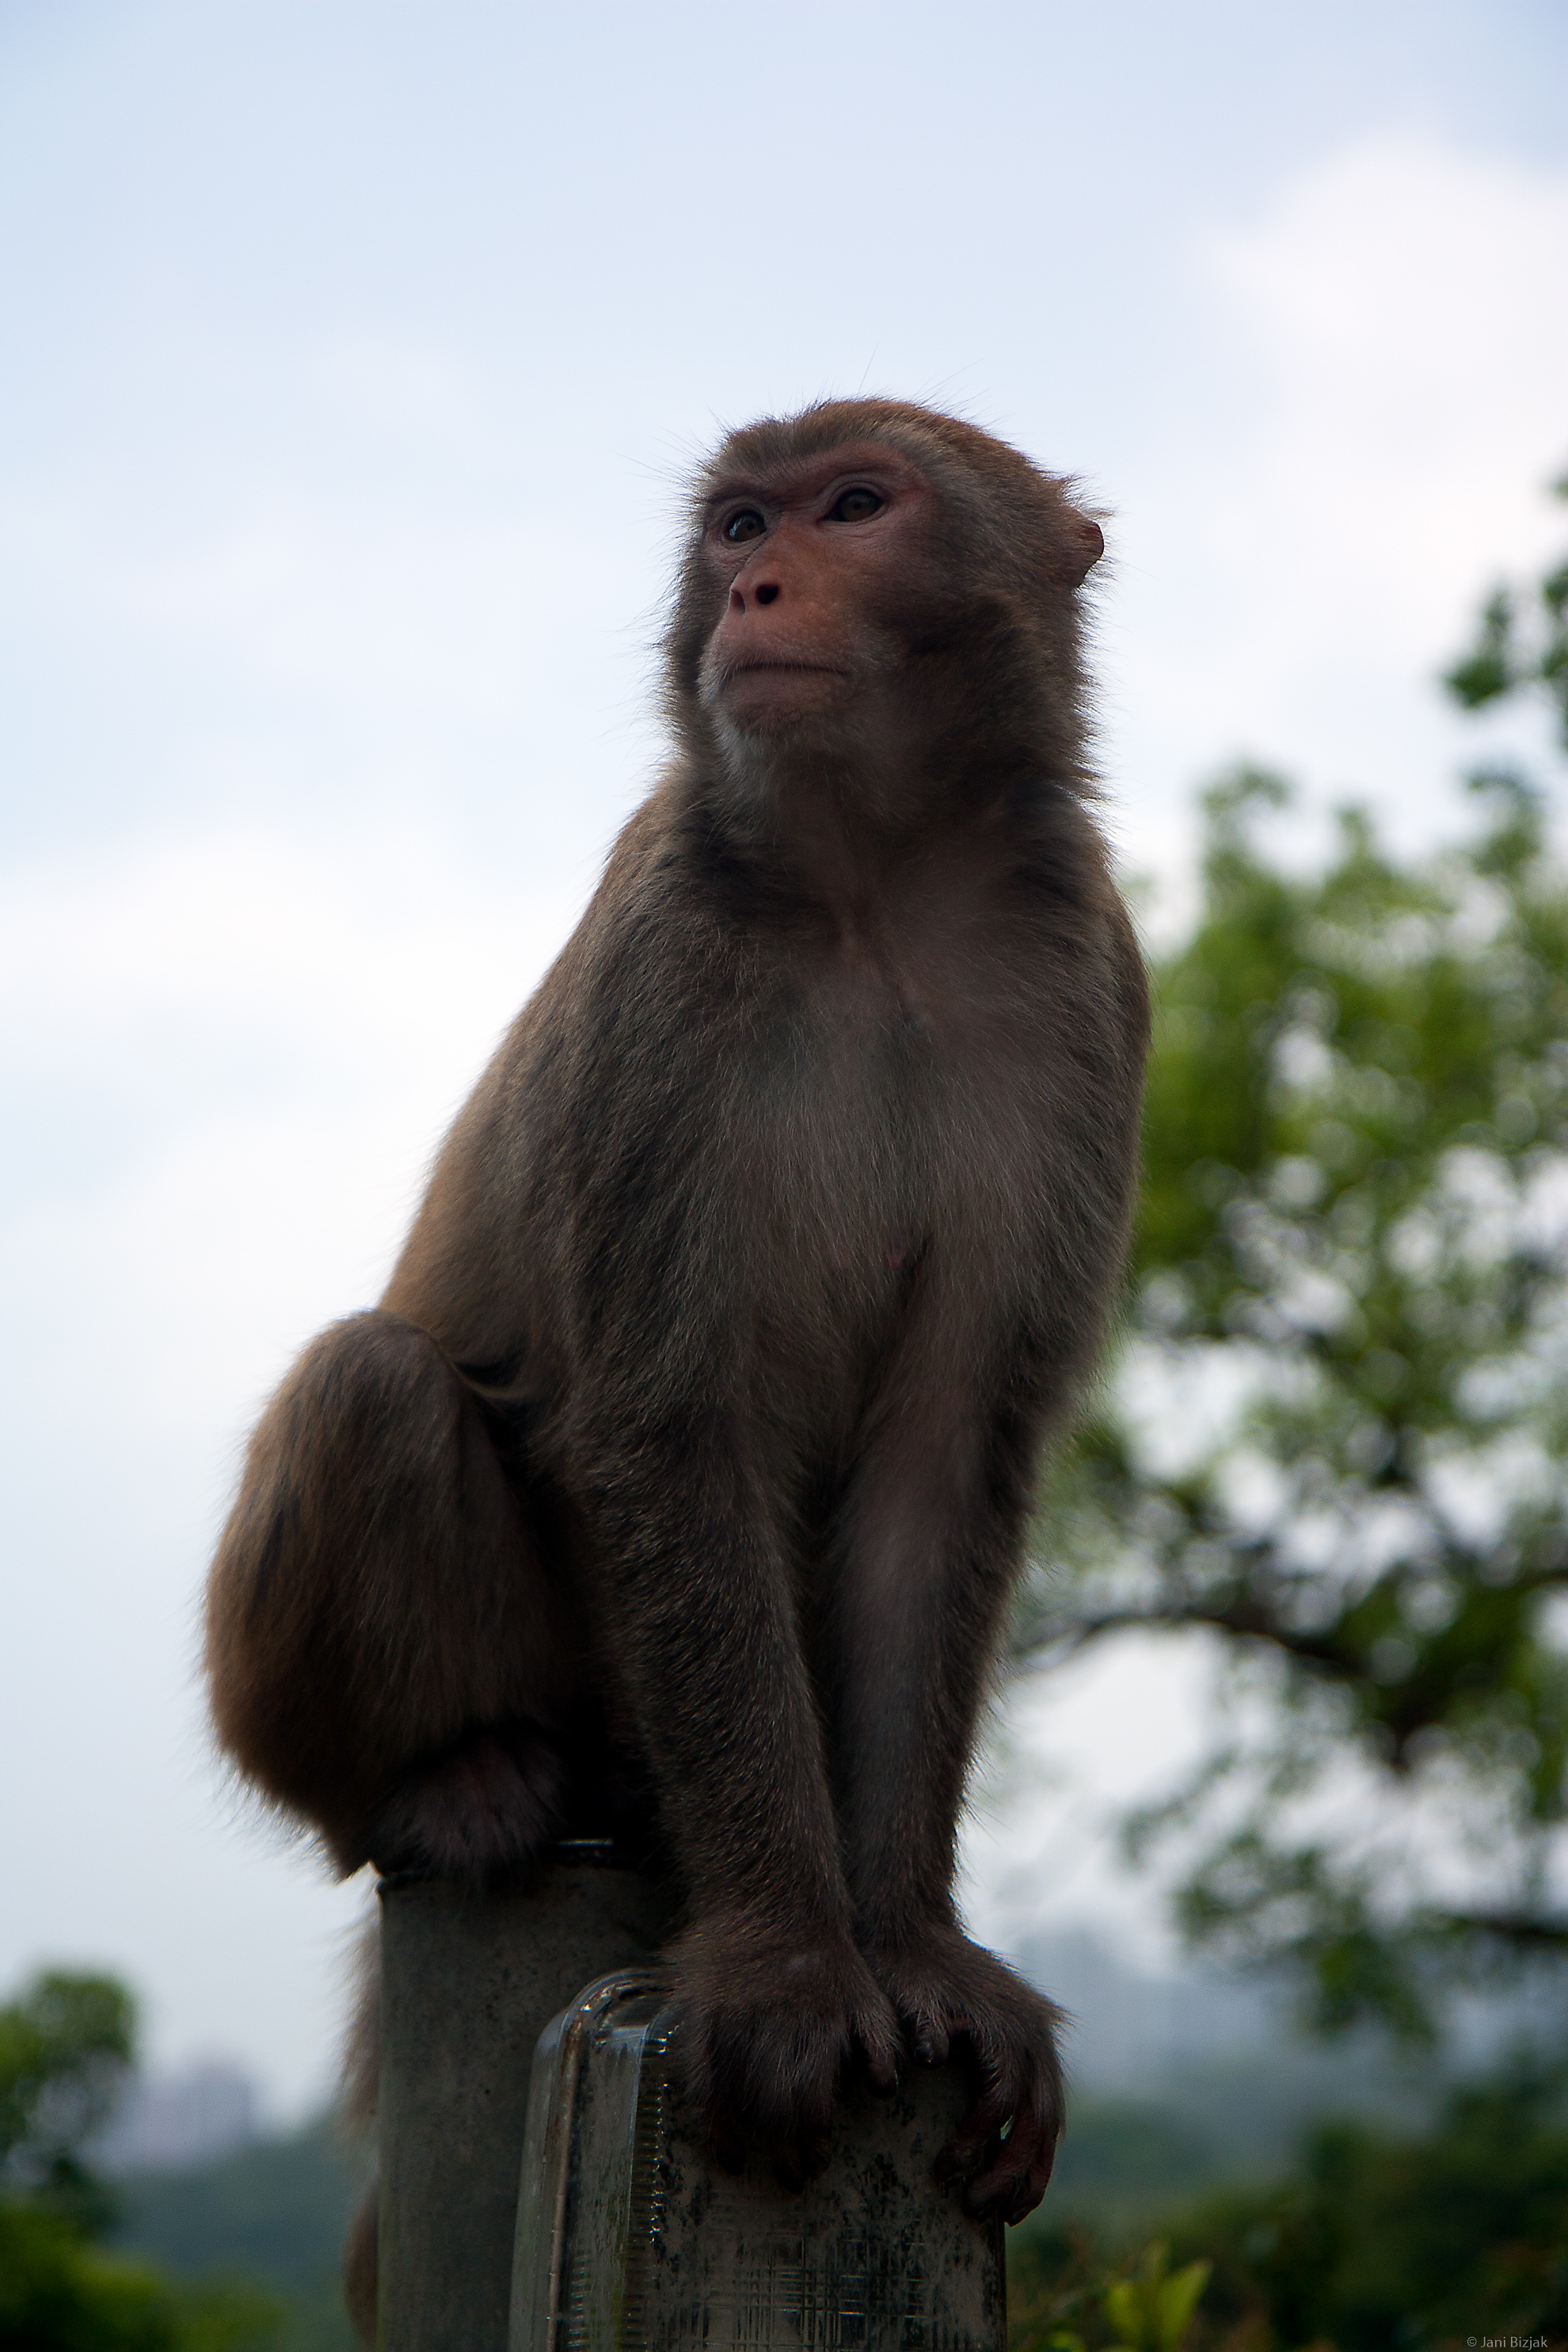 Monkeys are roaming one area harassing visitors and stealing food from their backpacks.